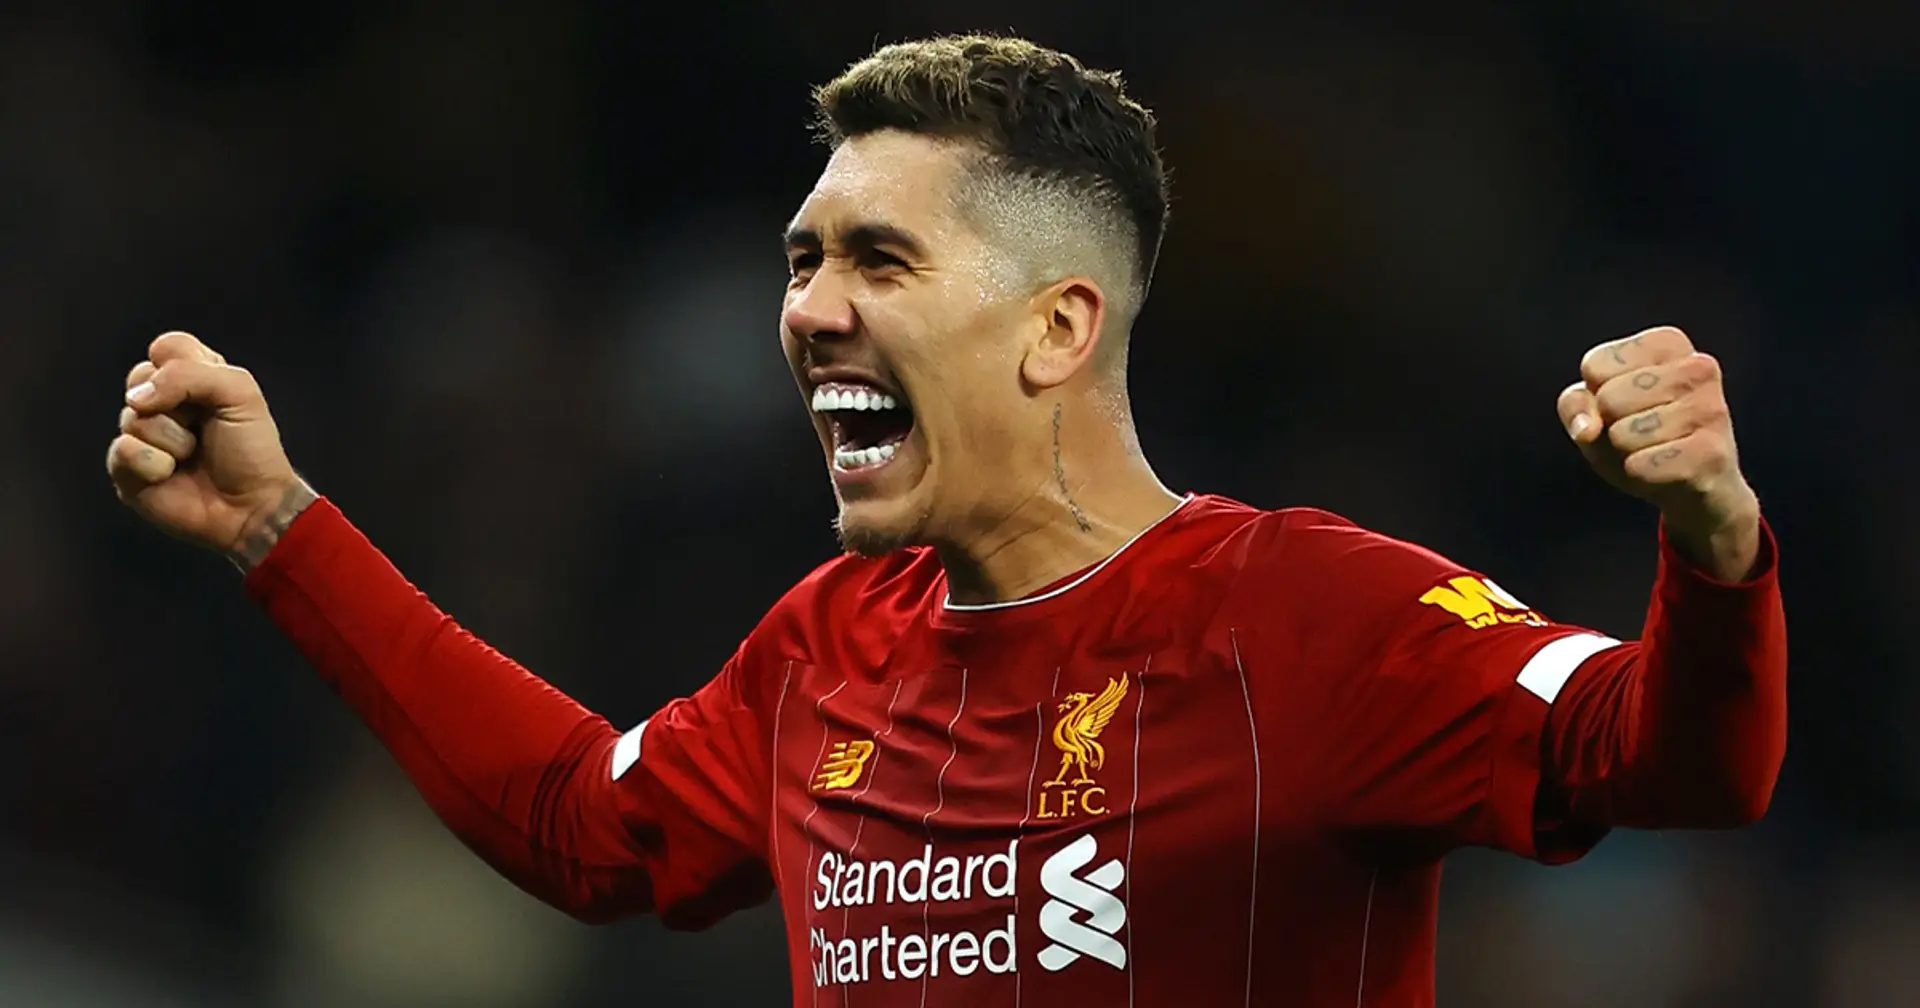 Everyone says it, few understand: Explaining what makes Firmino so underrated as the stereotype goes